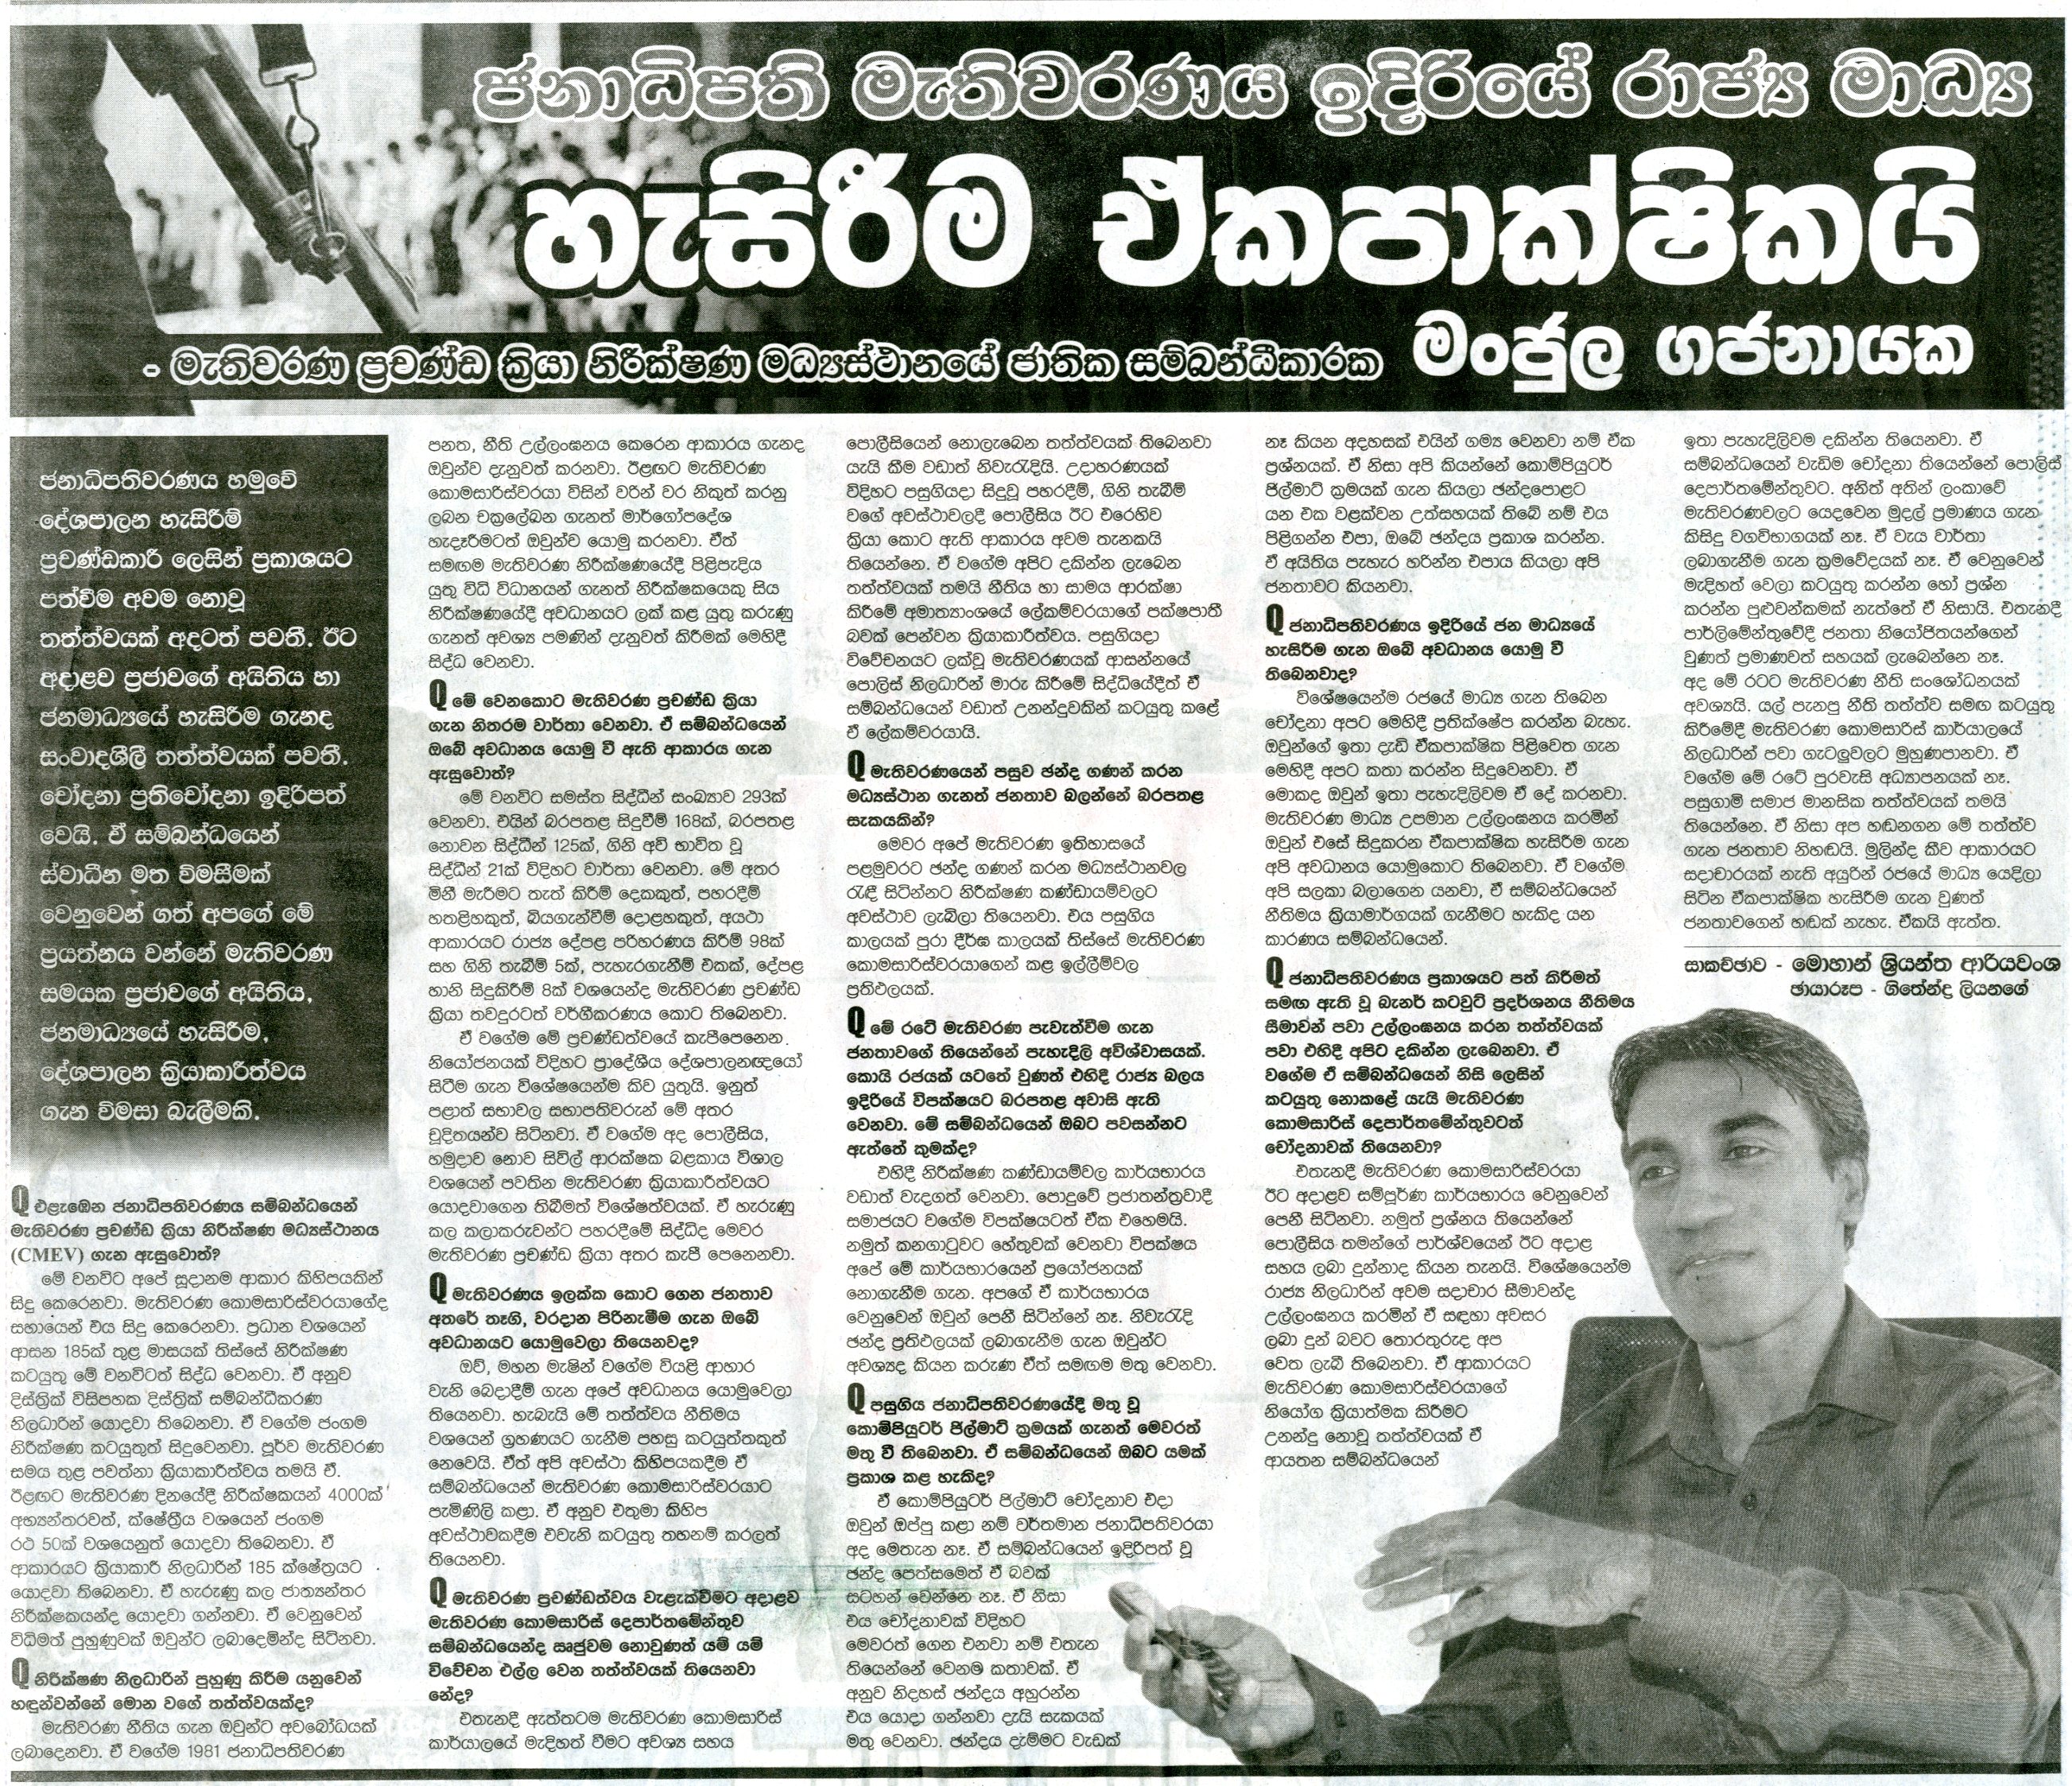 Interviews with newspapers | Election violence in Sri Lanka